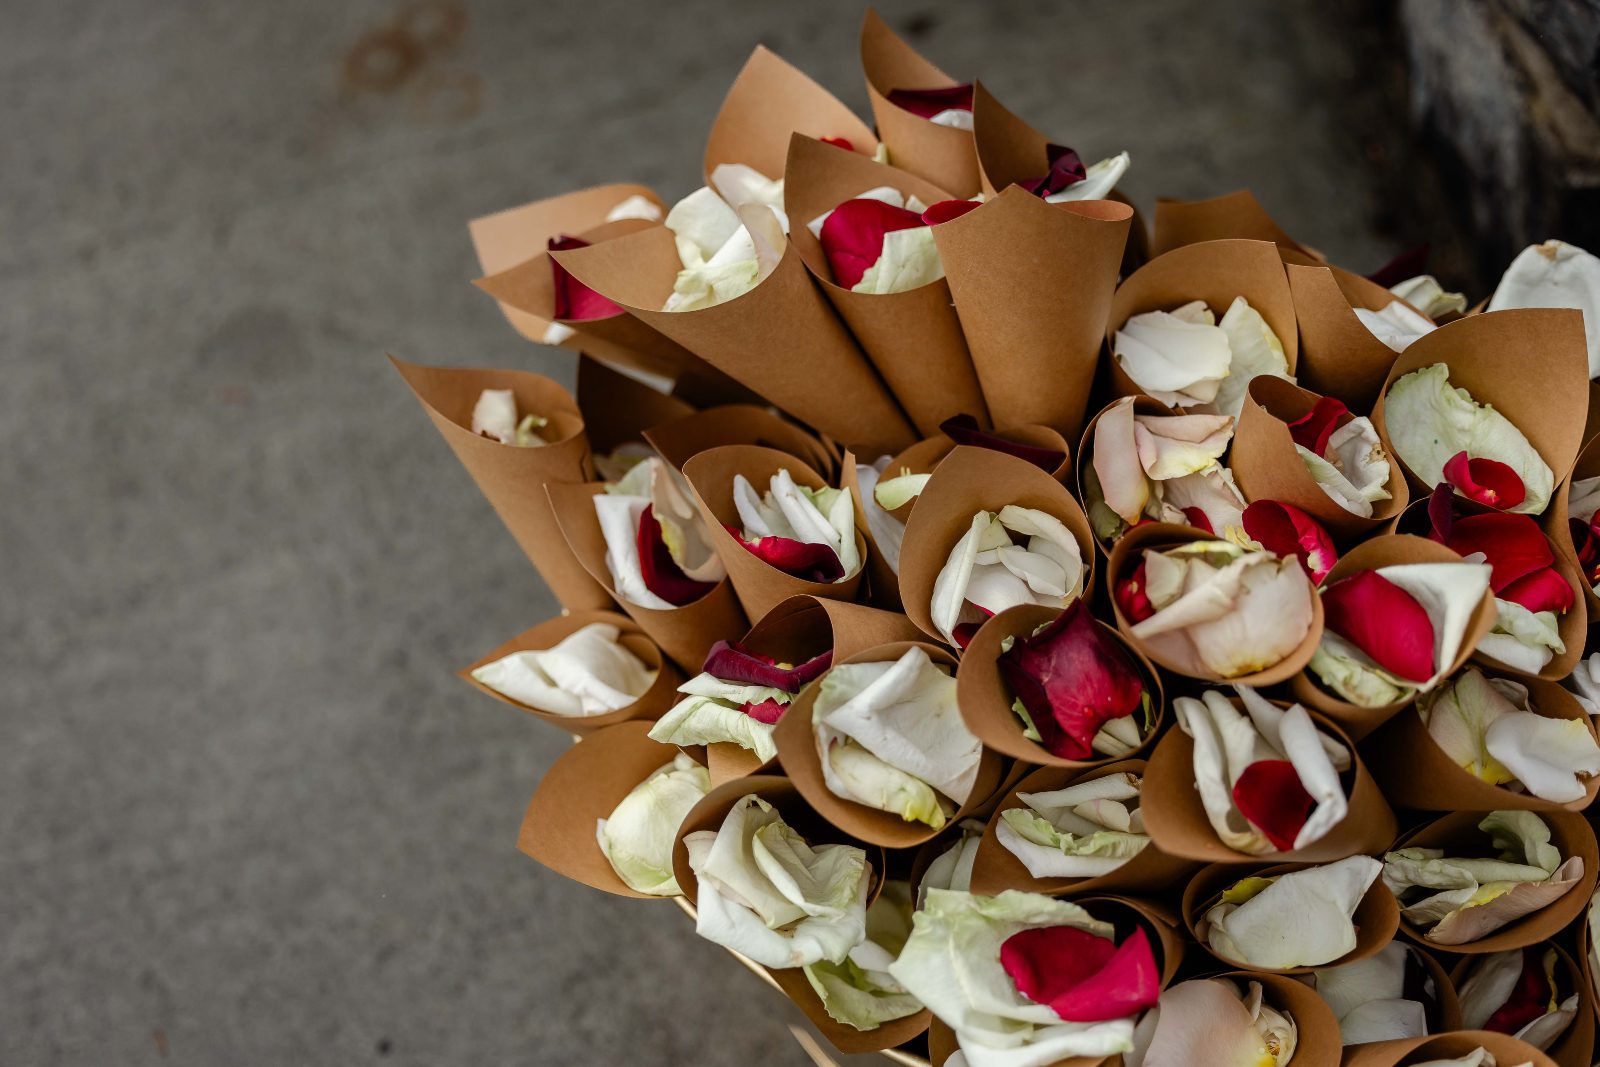 A grouping of paper cones holding rose petals for the guests to toss at the end of the ceremony